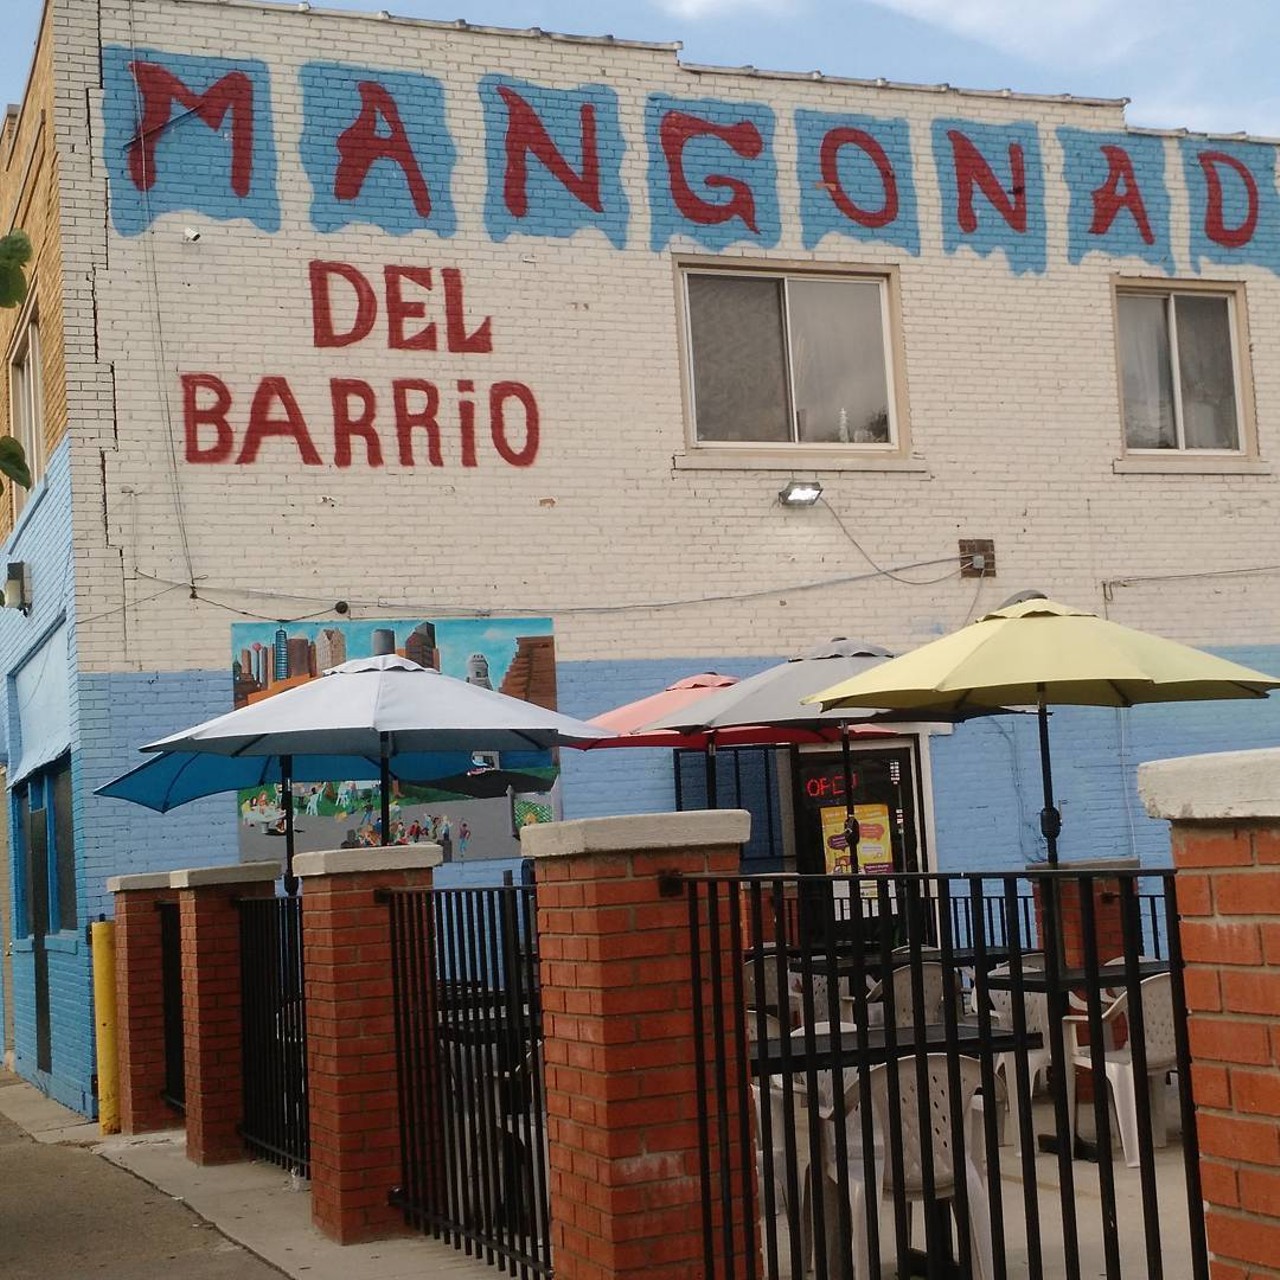 Mangonadas del Barrio #2, 4029 Vernor Highway
Maybe you went to El Club to check out one of your fave bands. Before soundcheck, treat your boo with a unique frozen Mexican treat, known as a mangonada. These concoctions are made with an overload of sliced mango, chili powder and chamoy sauce, all over a sweet slush.
Photo via Instagram user @exuberant_panoram.